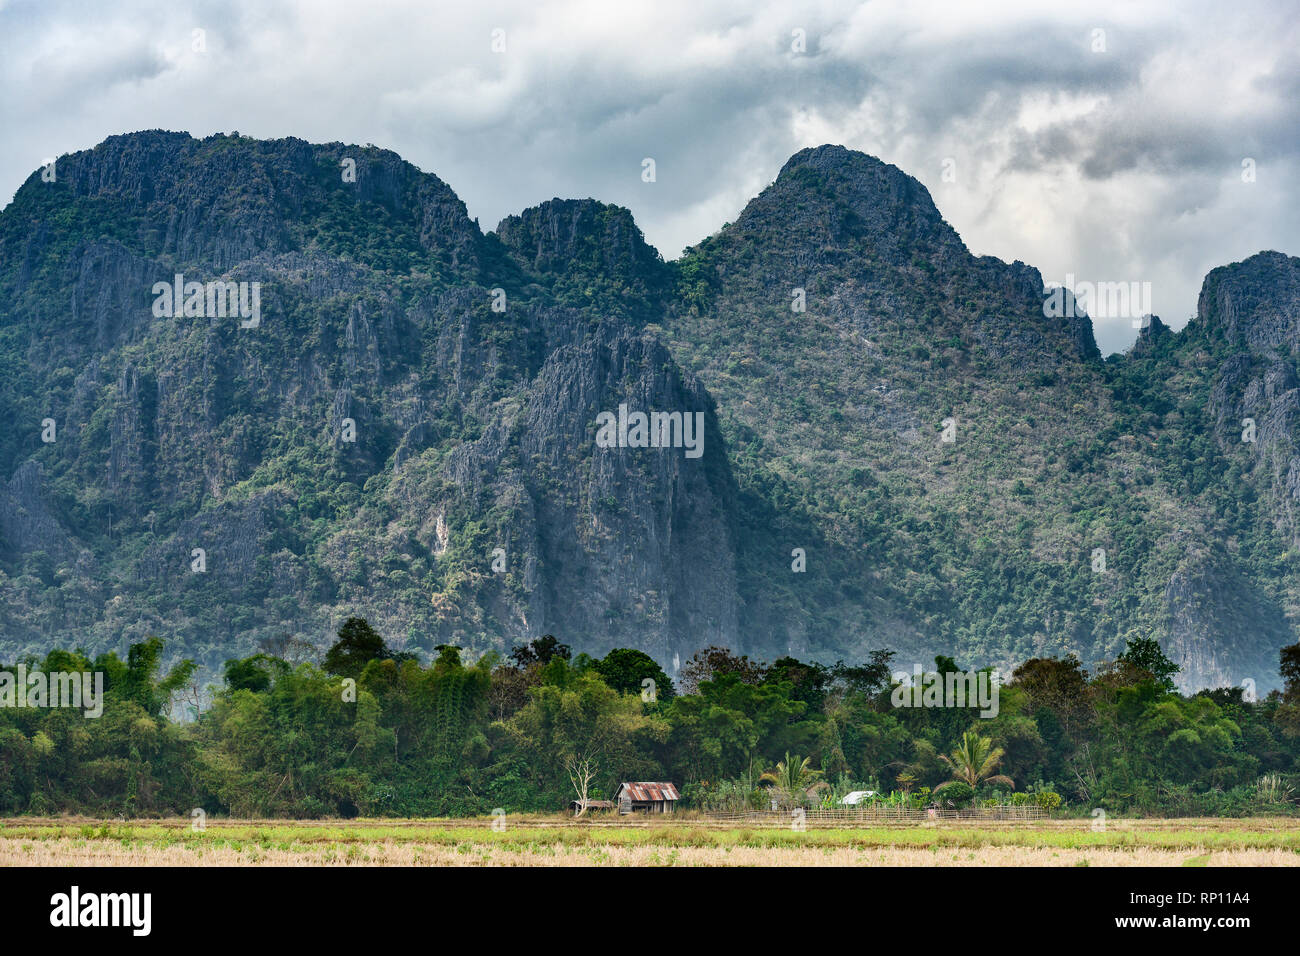 Stunning view of a some limestone mountains illuminated by some sun rays that filter through some clouds. Vang Vieng, Laos. Stock Photo